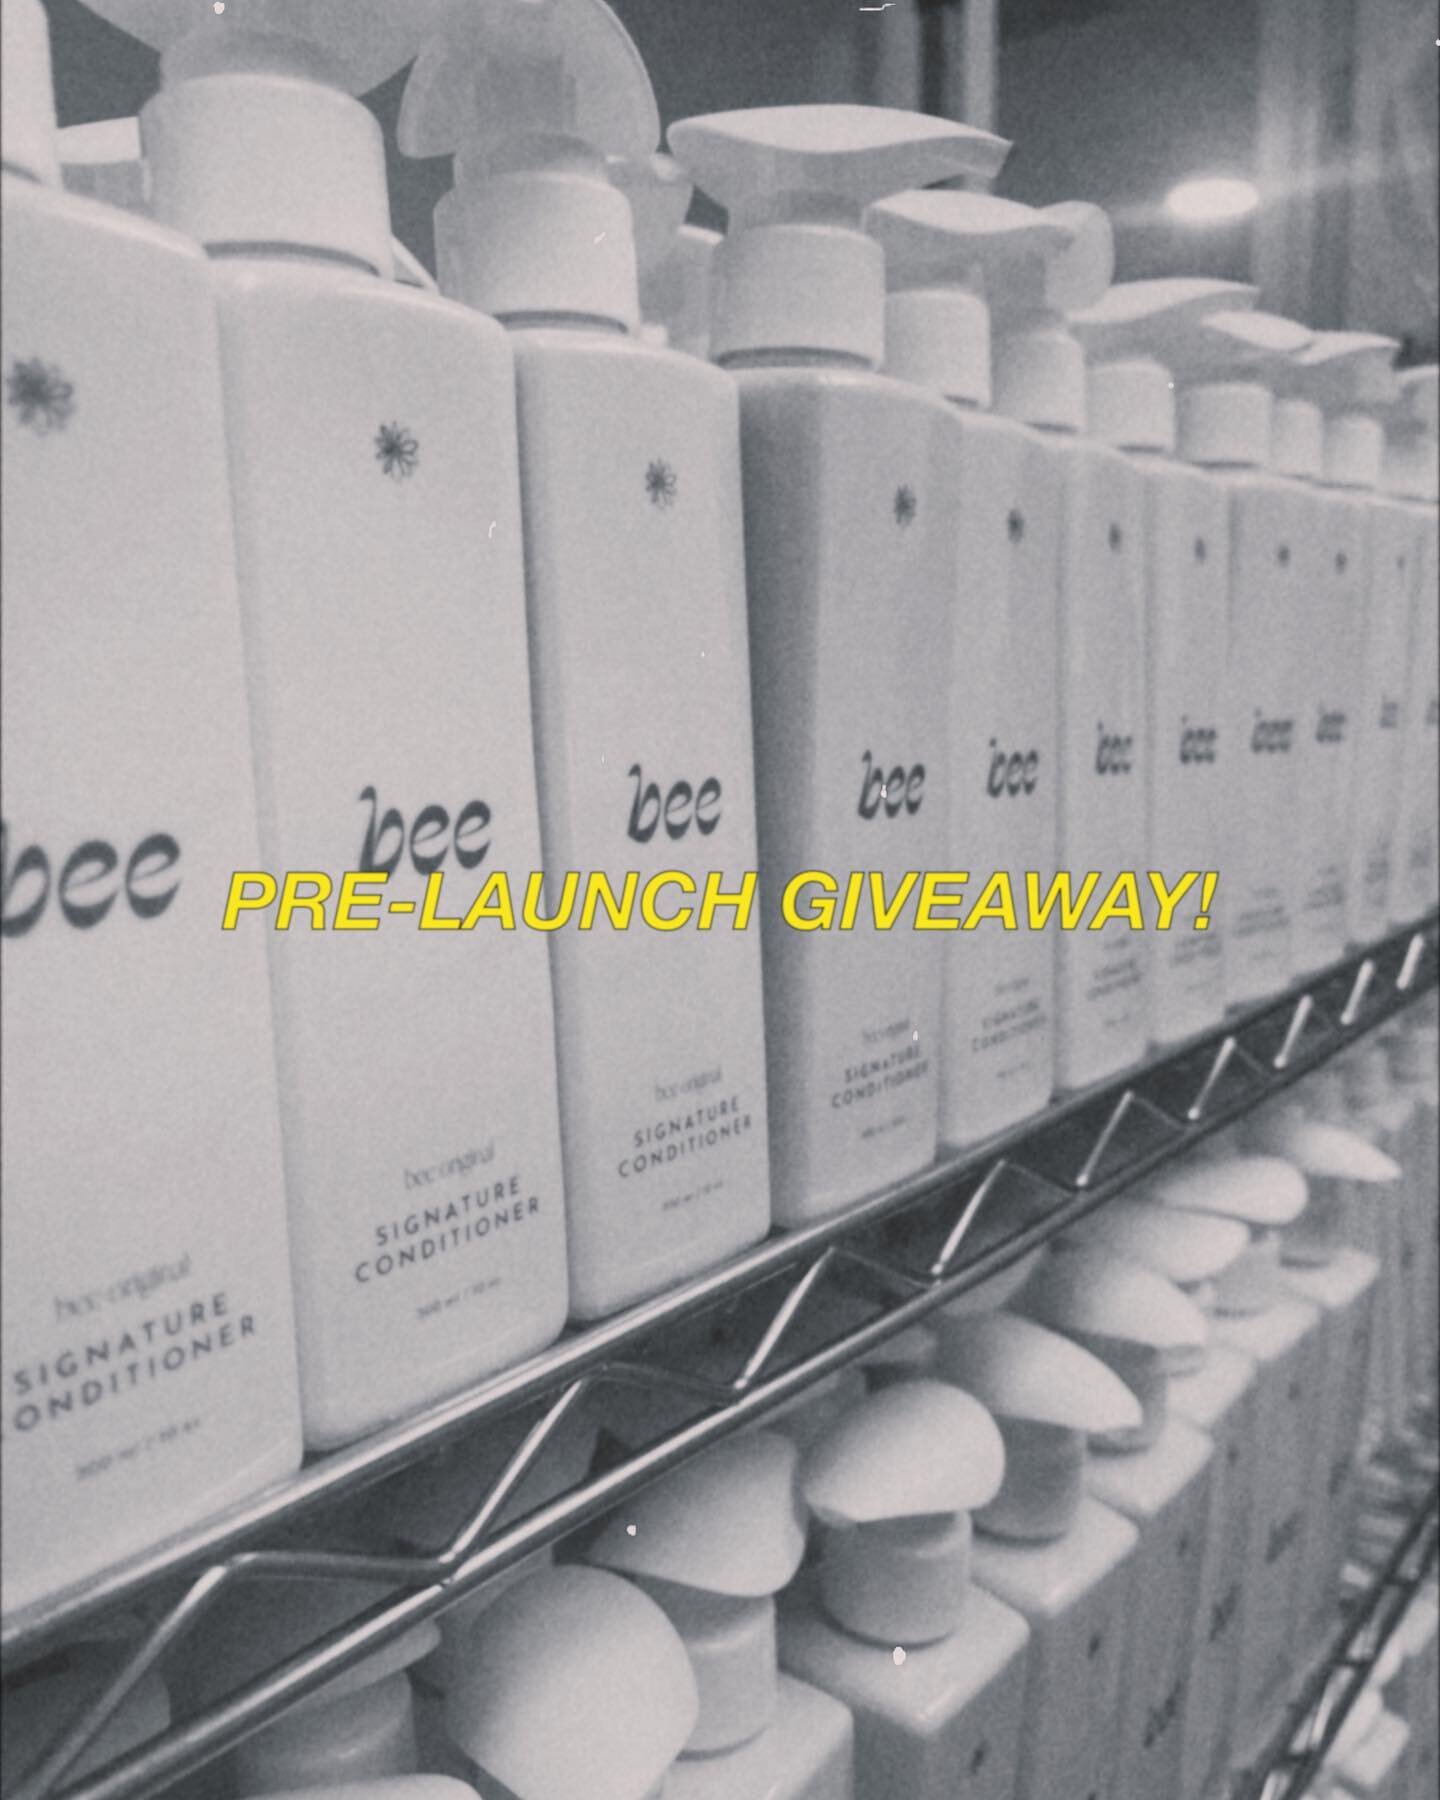 1 week from tomorrow we officially launch our new brand! Want to be one of the first to receive our new products? Let&rsquo;s do a GIVEAWAY! ✨🧴🧴

To enter, please do the following: 
- Like this post
- Follow @beehairco
- Tag a friend. Each tag is a